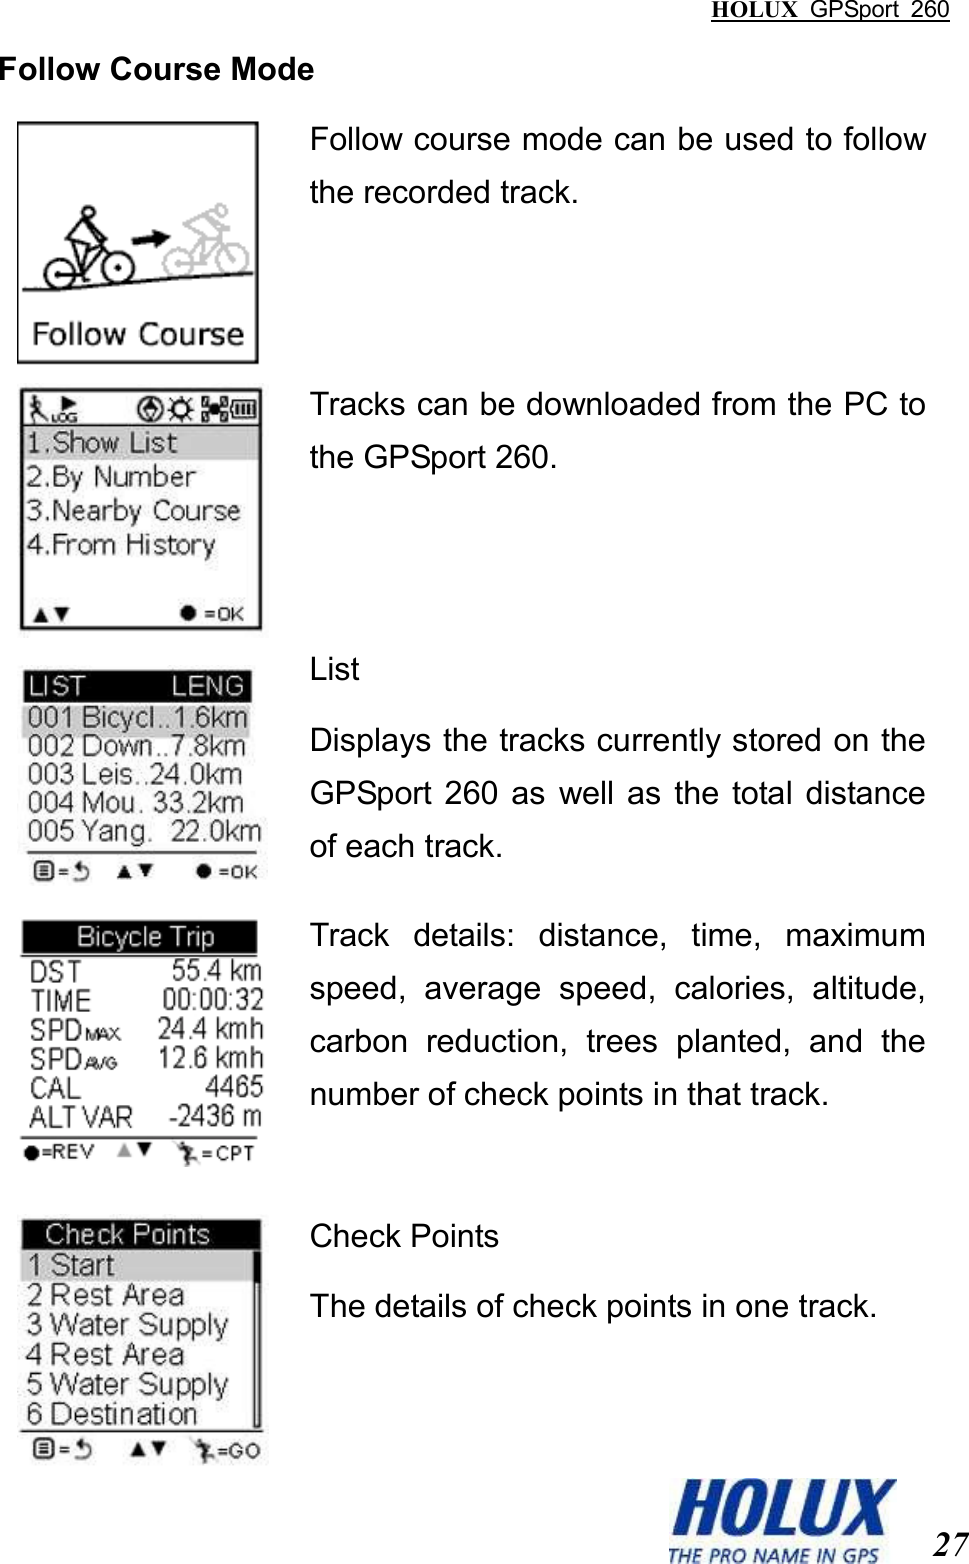 HOLUX  GPSport  260  27 Follow Course Mode  Follow course mode can be used to follow the recorded track.  Tracks can be downloaded from the PC to the GPSport 260.  List Displays the tracks currently stored on the GPSport  260  as  well as the total  distance of each track.  Track  details:  distance,  time,  maximum speed,  average  speed,  calories,  altitude, carbon  reduction,  trees  planted,  and  the number of check points in that track.     Check Points The details of check points in one track. 